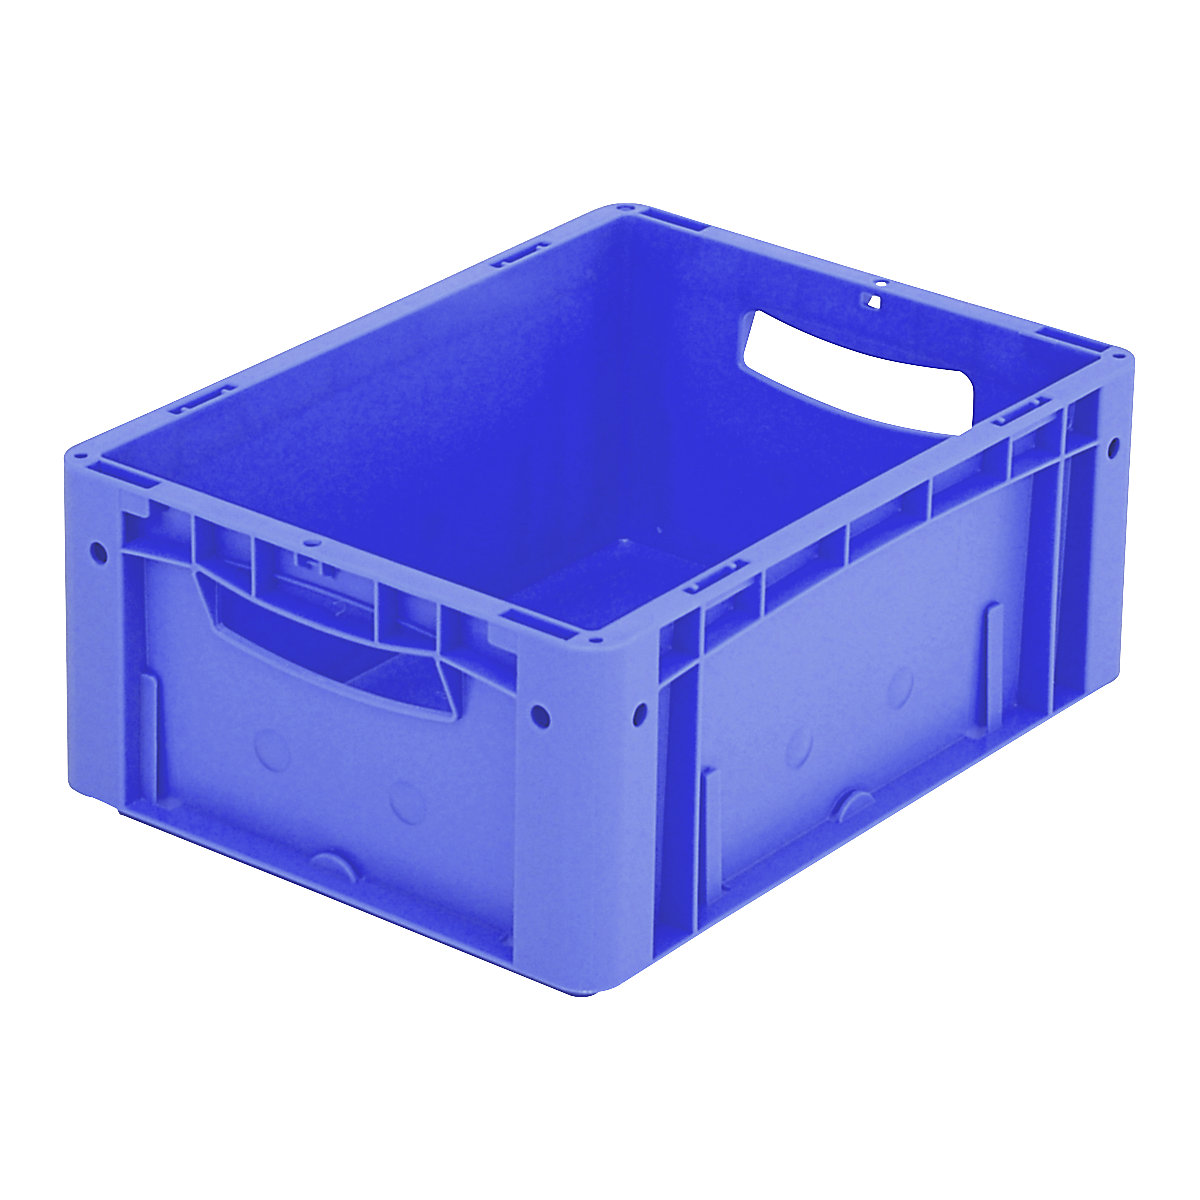 XL Euro stacking container – BITO, standard model, LxWxH 400 x 300 x 170 mm-1